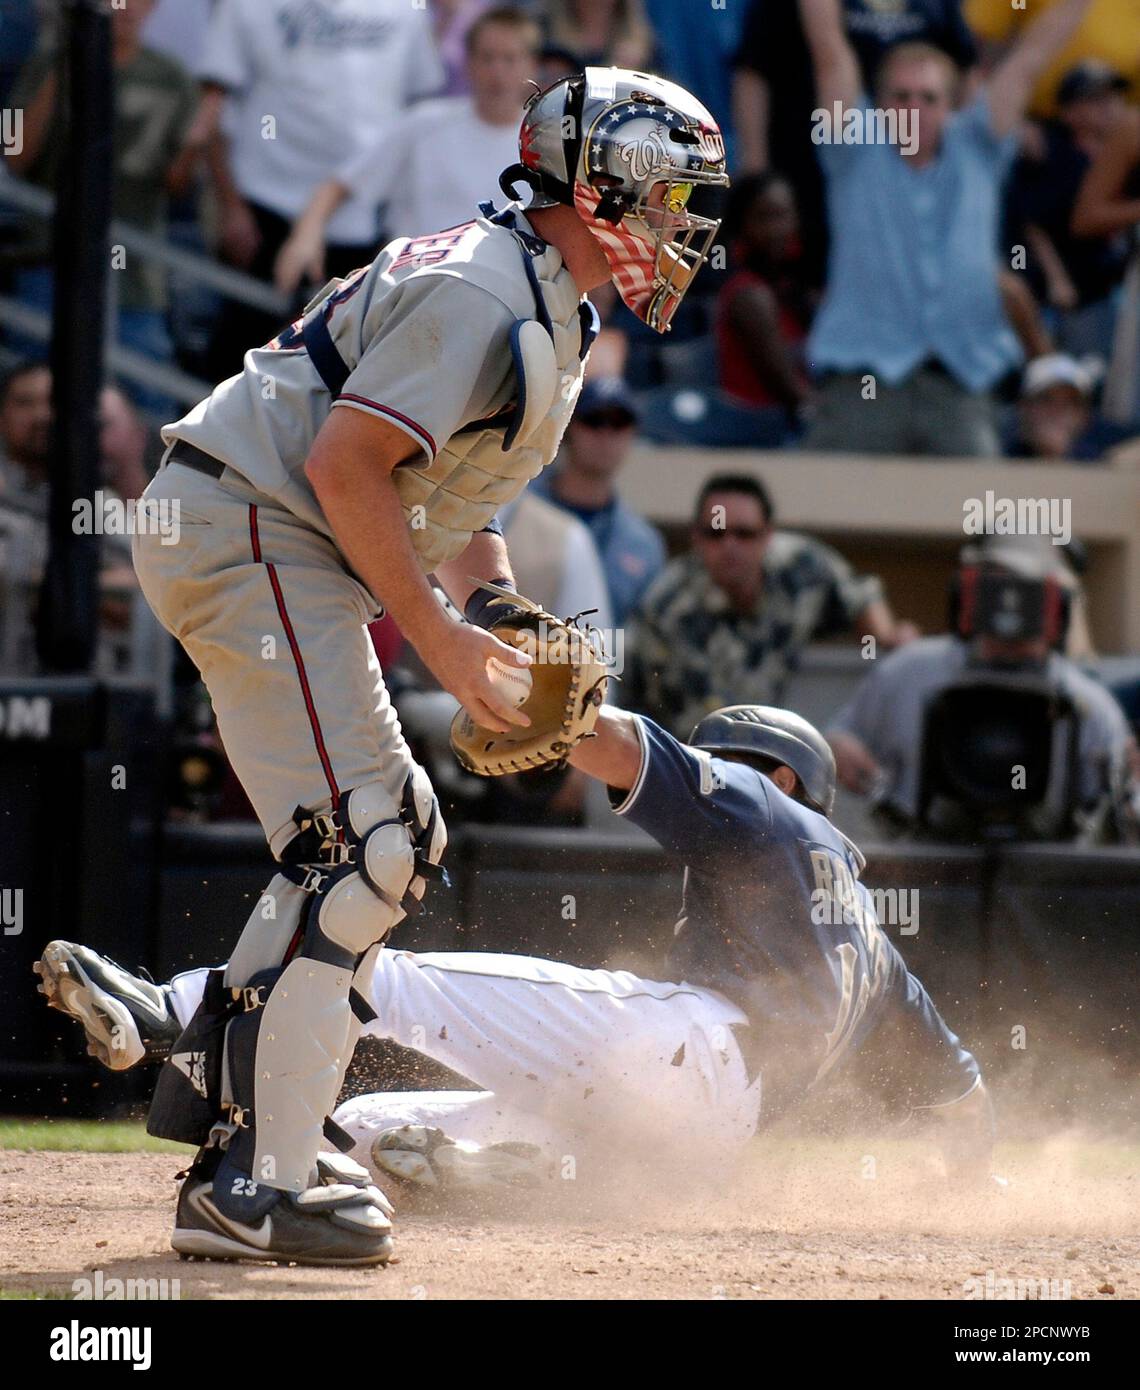 San Diego Padres' Dave Roberts, right, scores the winning run as Washington  Nationals catcher Brian Schneider catches the ball too late for the tag in  the 10th inning of a baseball game